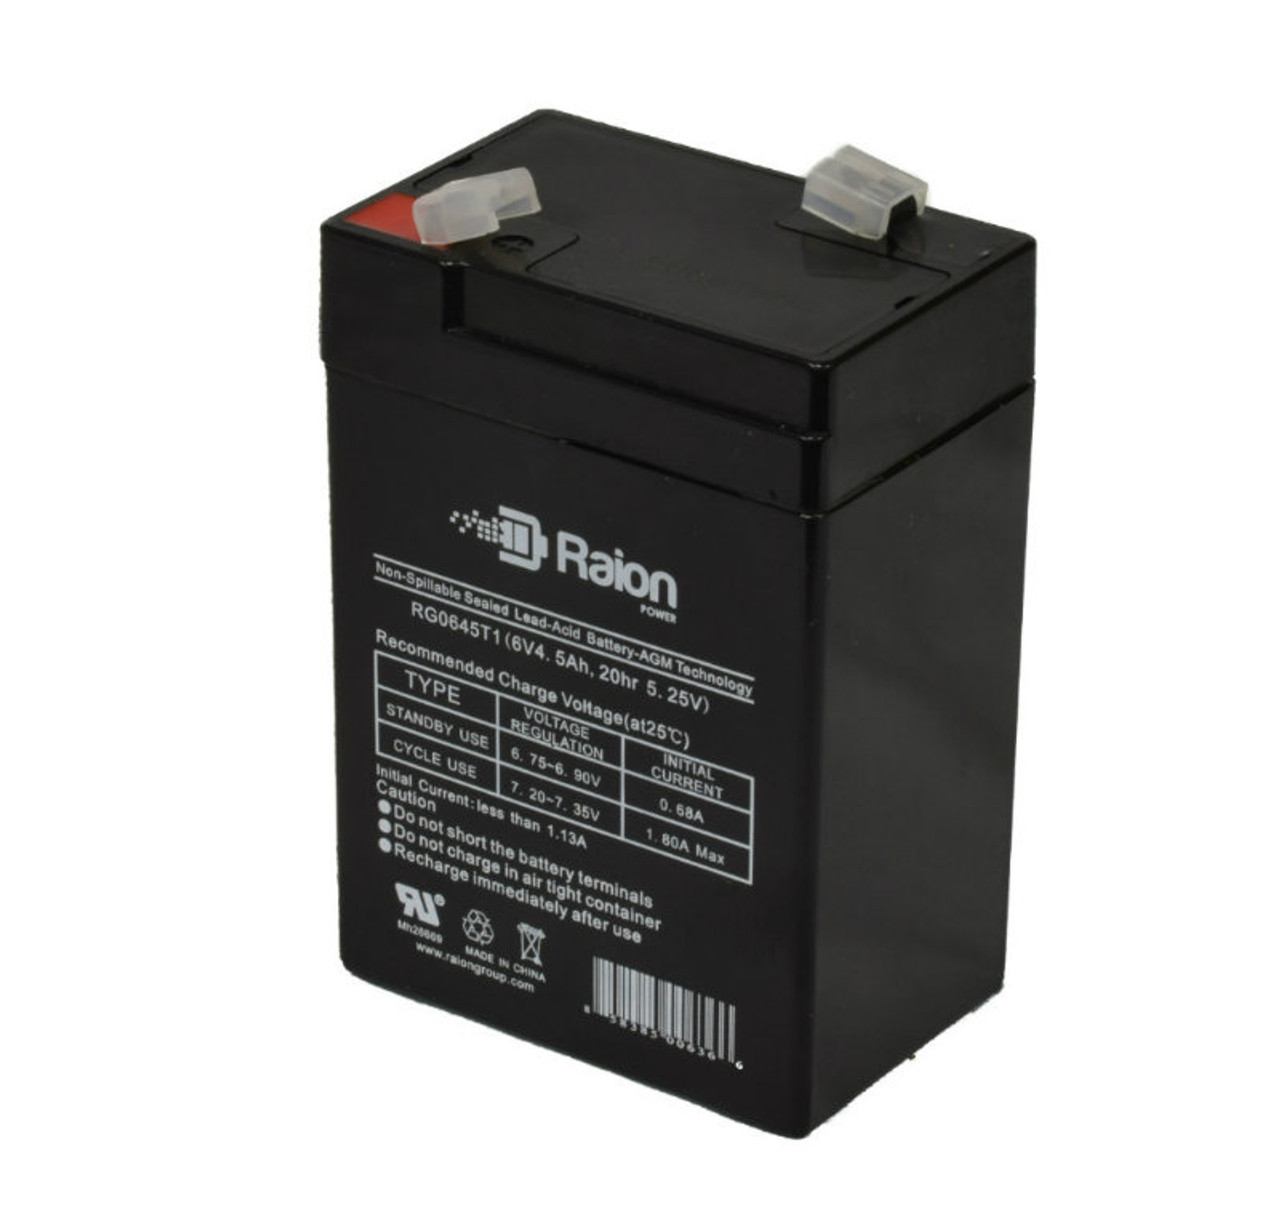 Raion Power RG0645T1 6V 4.5Ah Replacement Battery Cartridge for Light Alarms X7